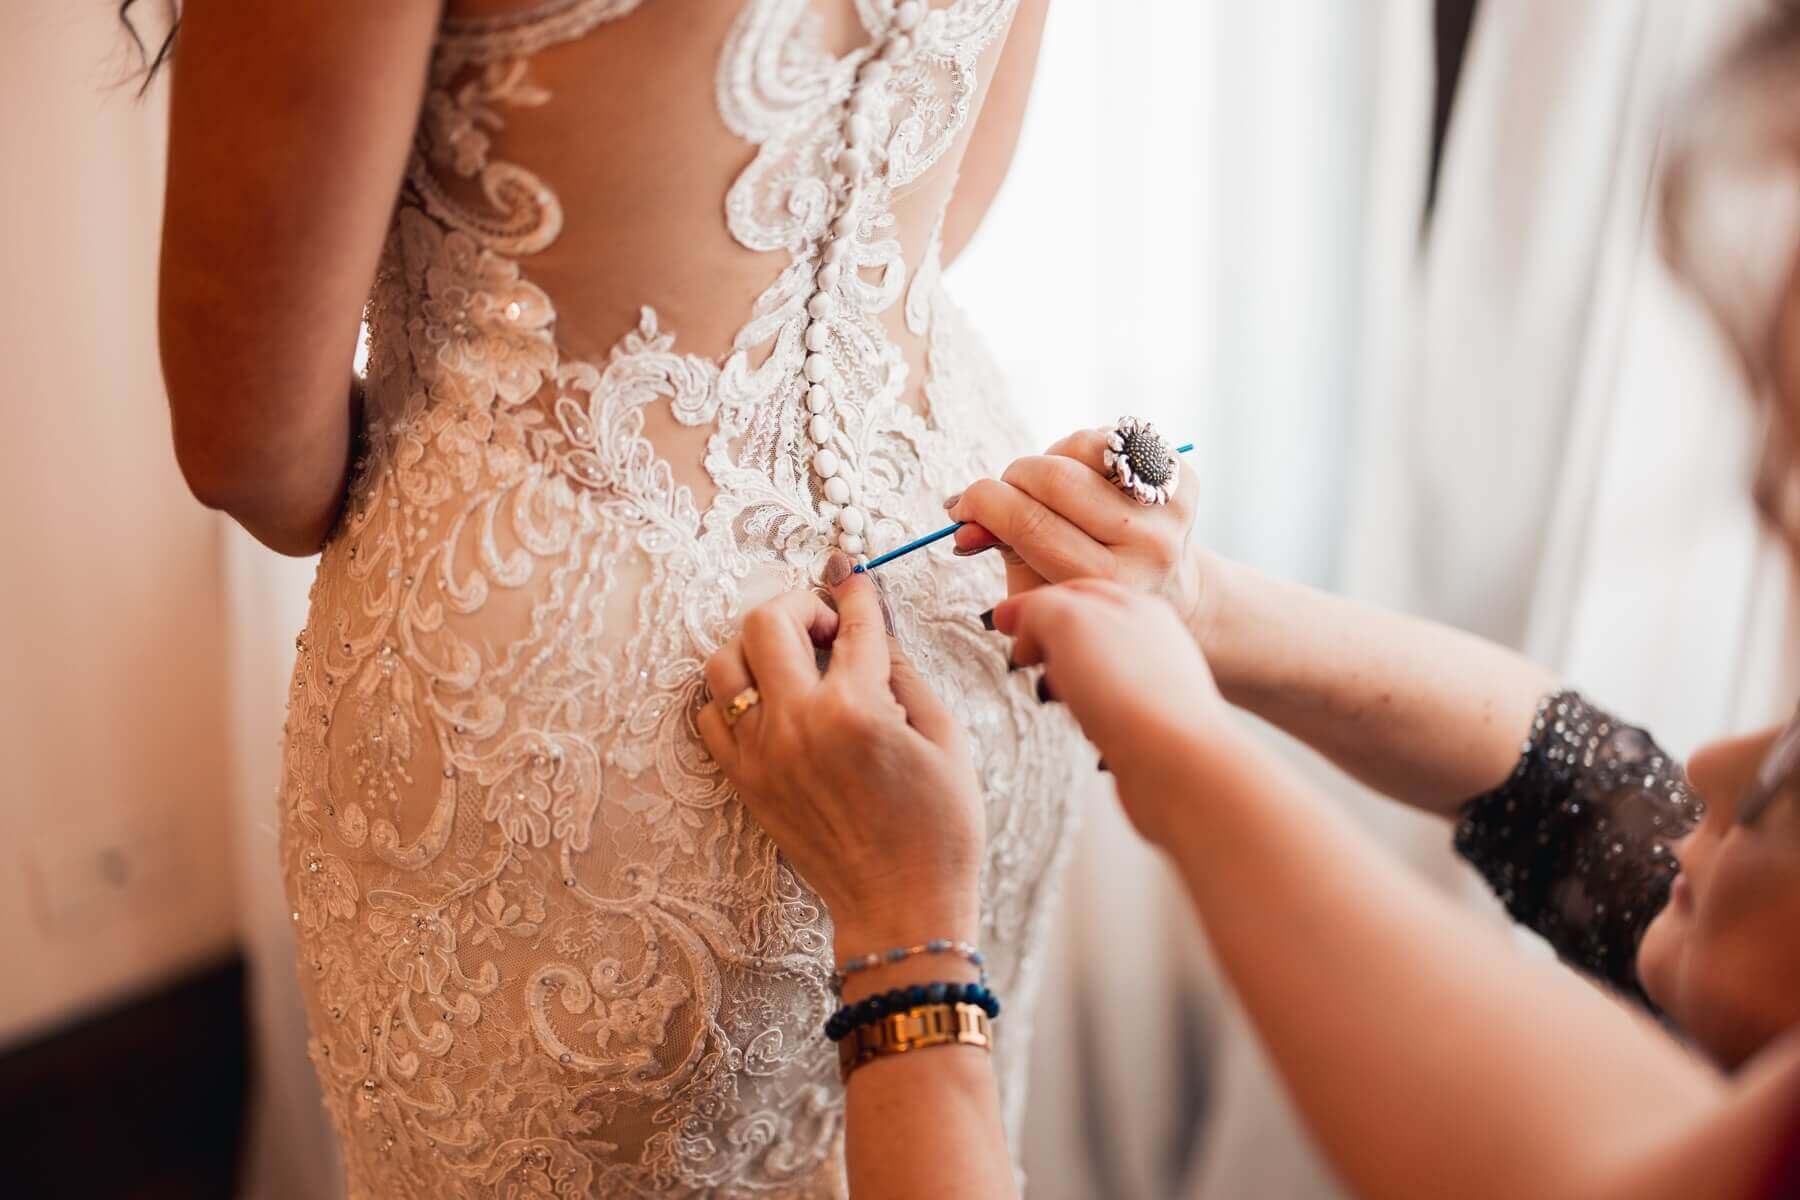 Mom helping button up bride's dress